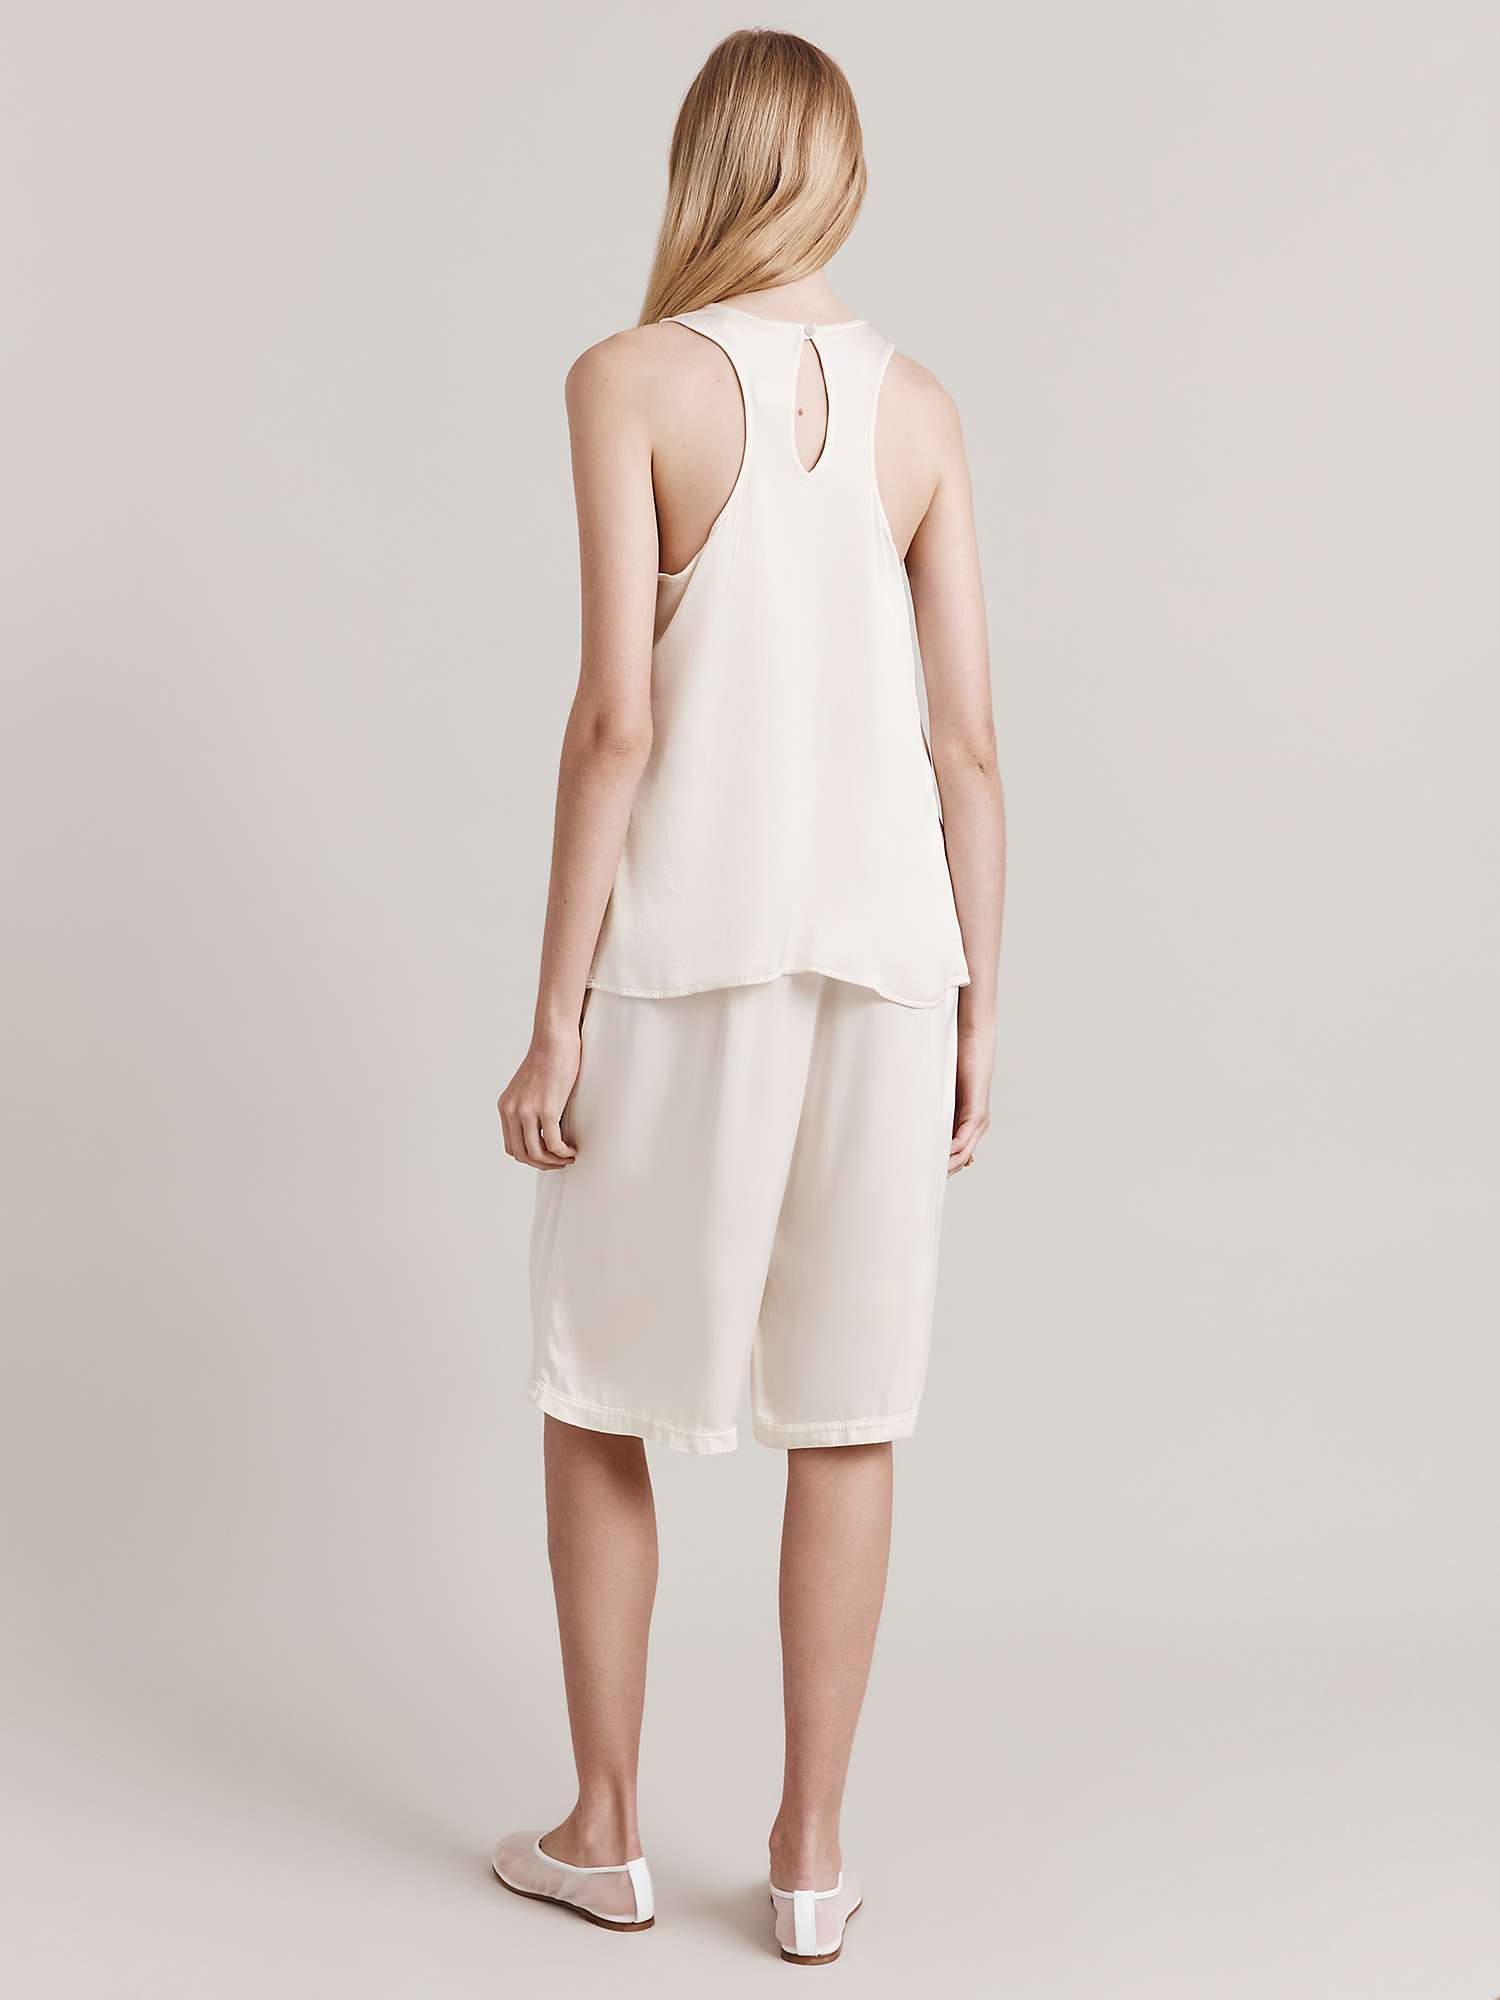 Buy Ghost Bella Tailored Satin Shorts Online at johnlewis.com